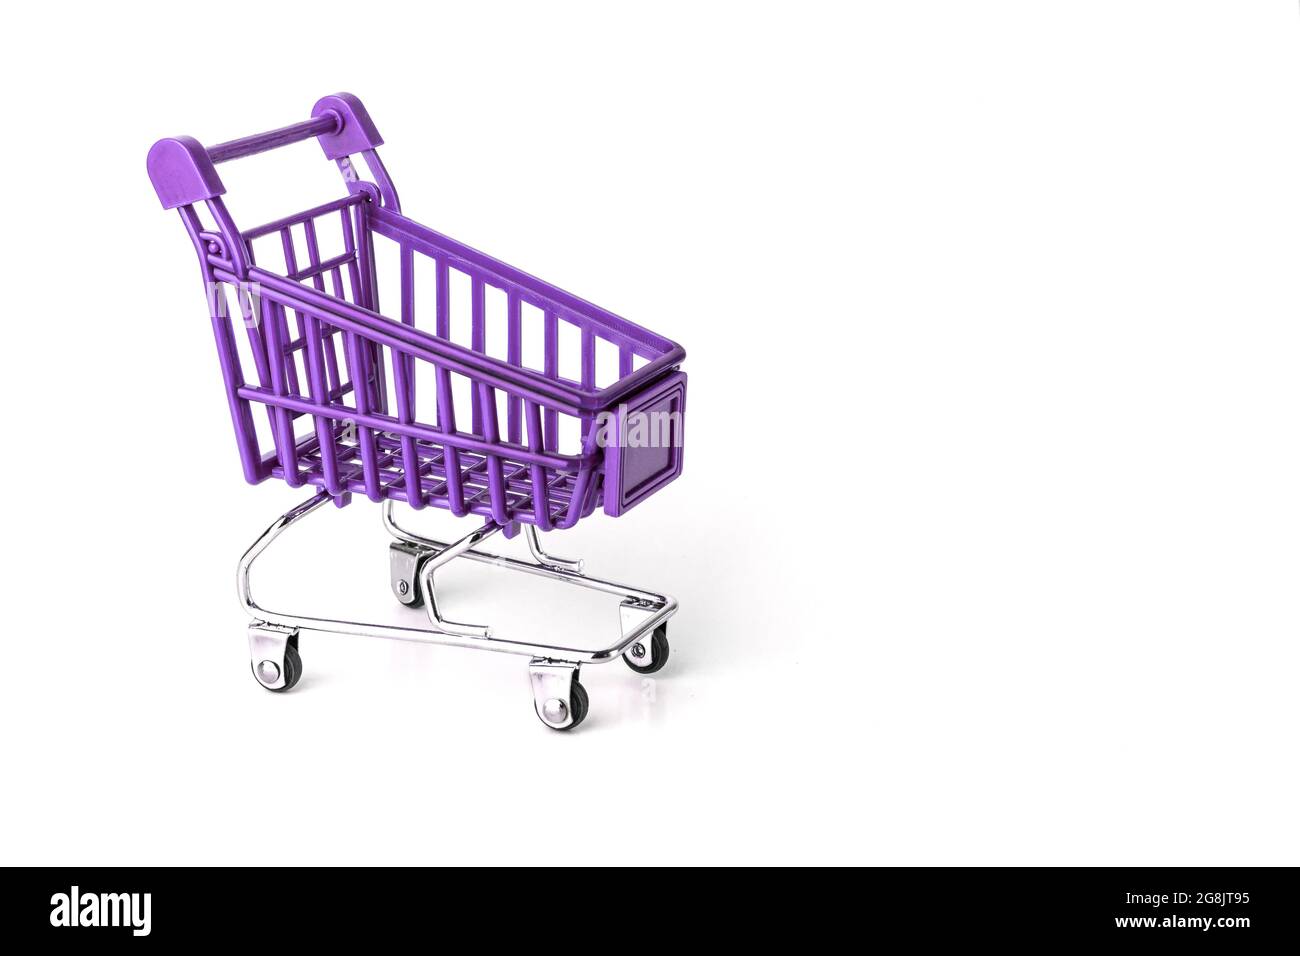 Close up of supermarket grocery push cart for shopping with black wheels and plastic elements on handle isolated on white background. Concept of Stock Photo